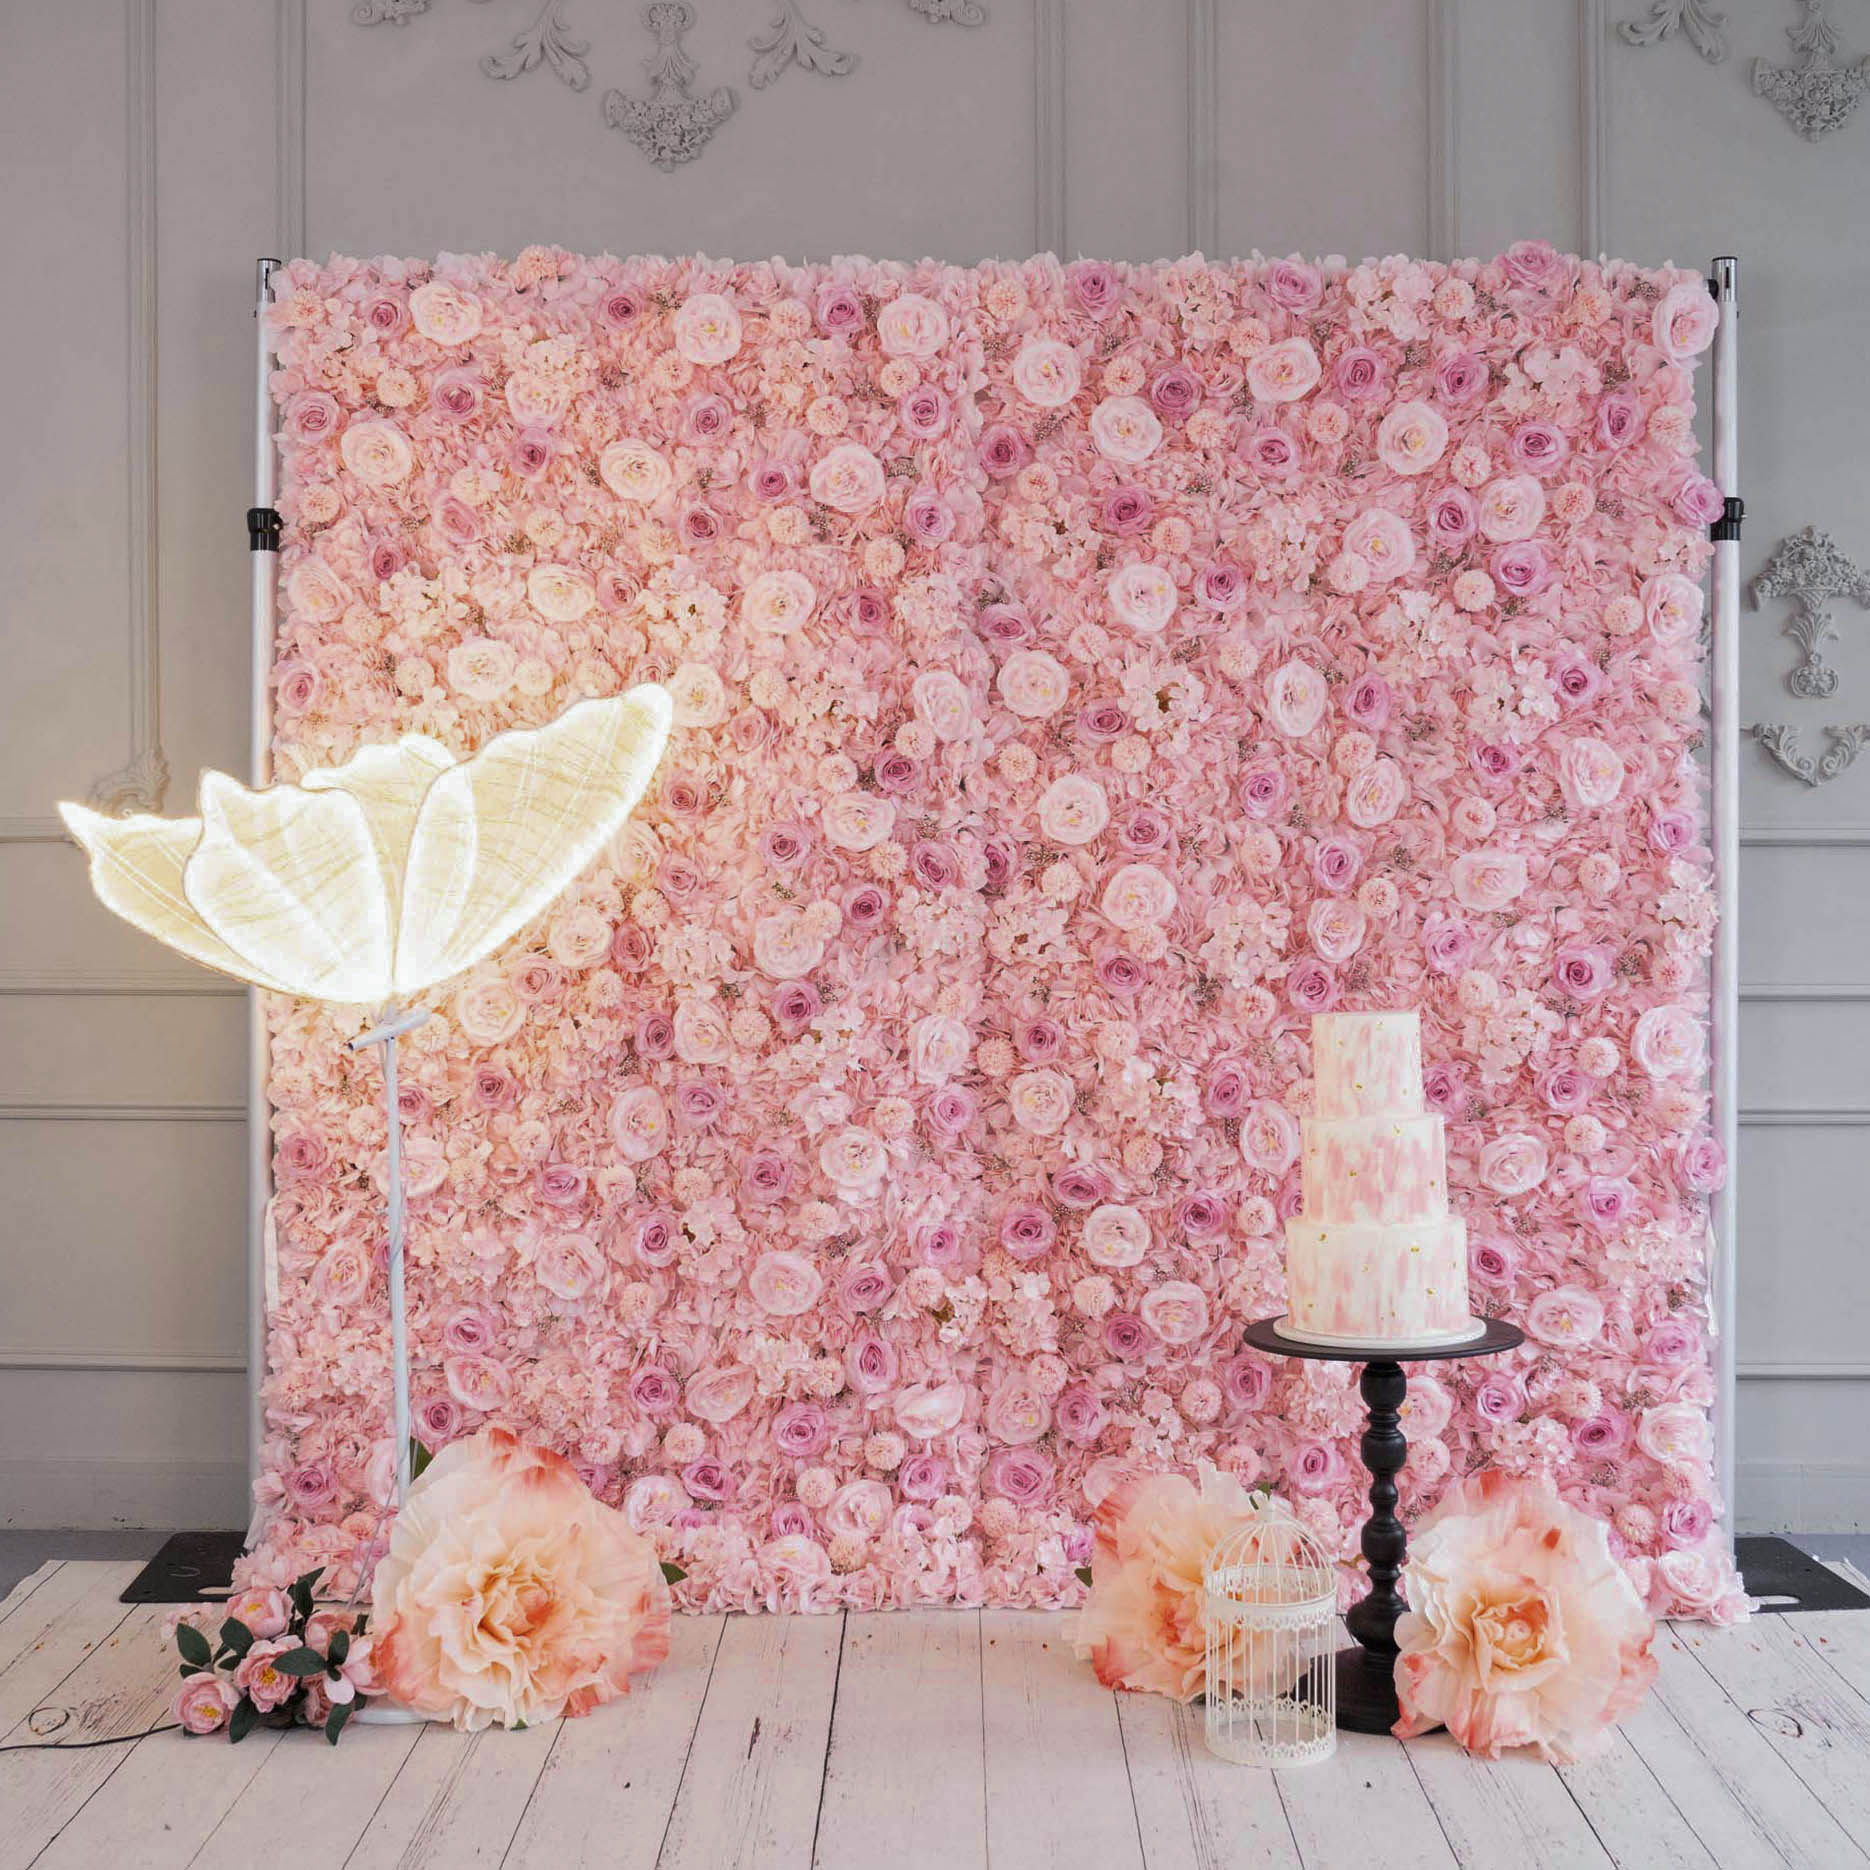 Flower Wall Baby Pink Rolling Up Curtain Floral Backdrop Wedding Party Proposal Decor